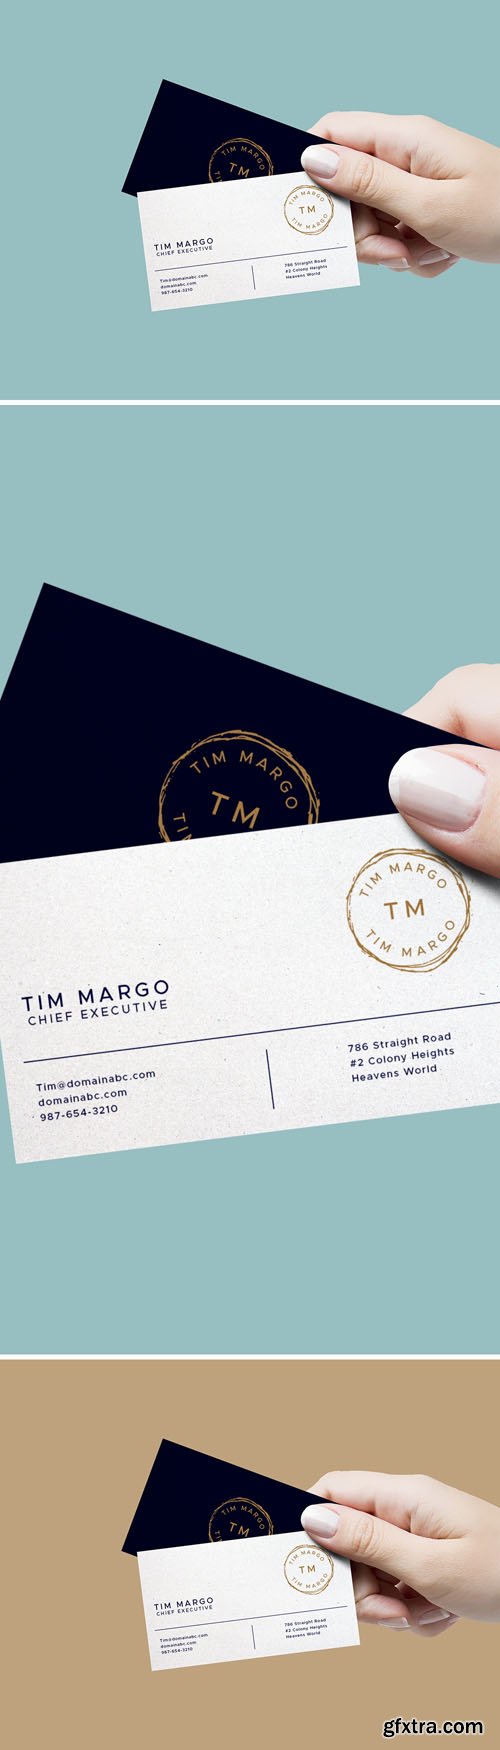 Hand Holding Business Cards PSD Mockup